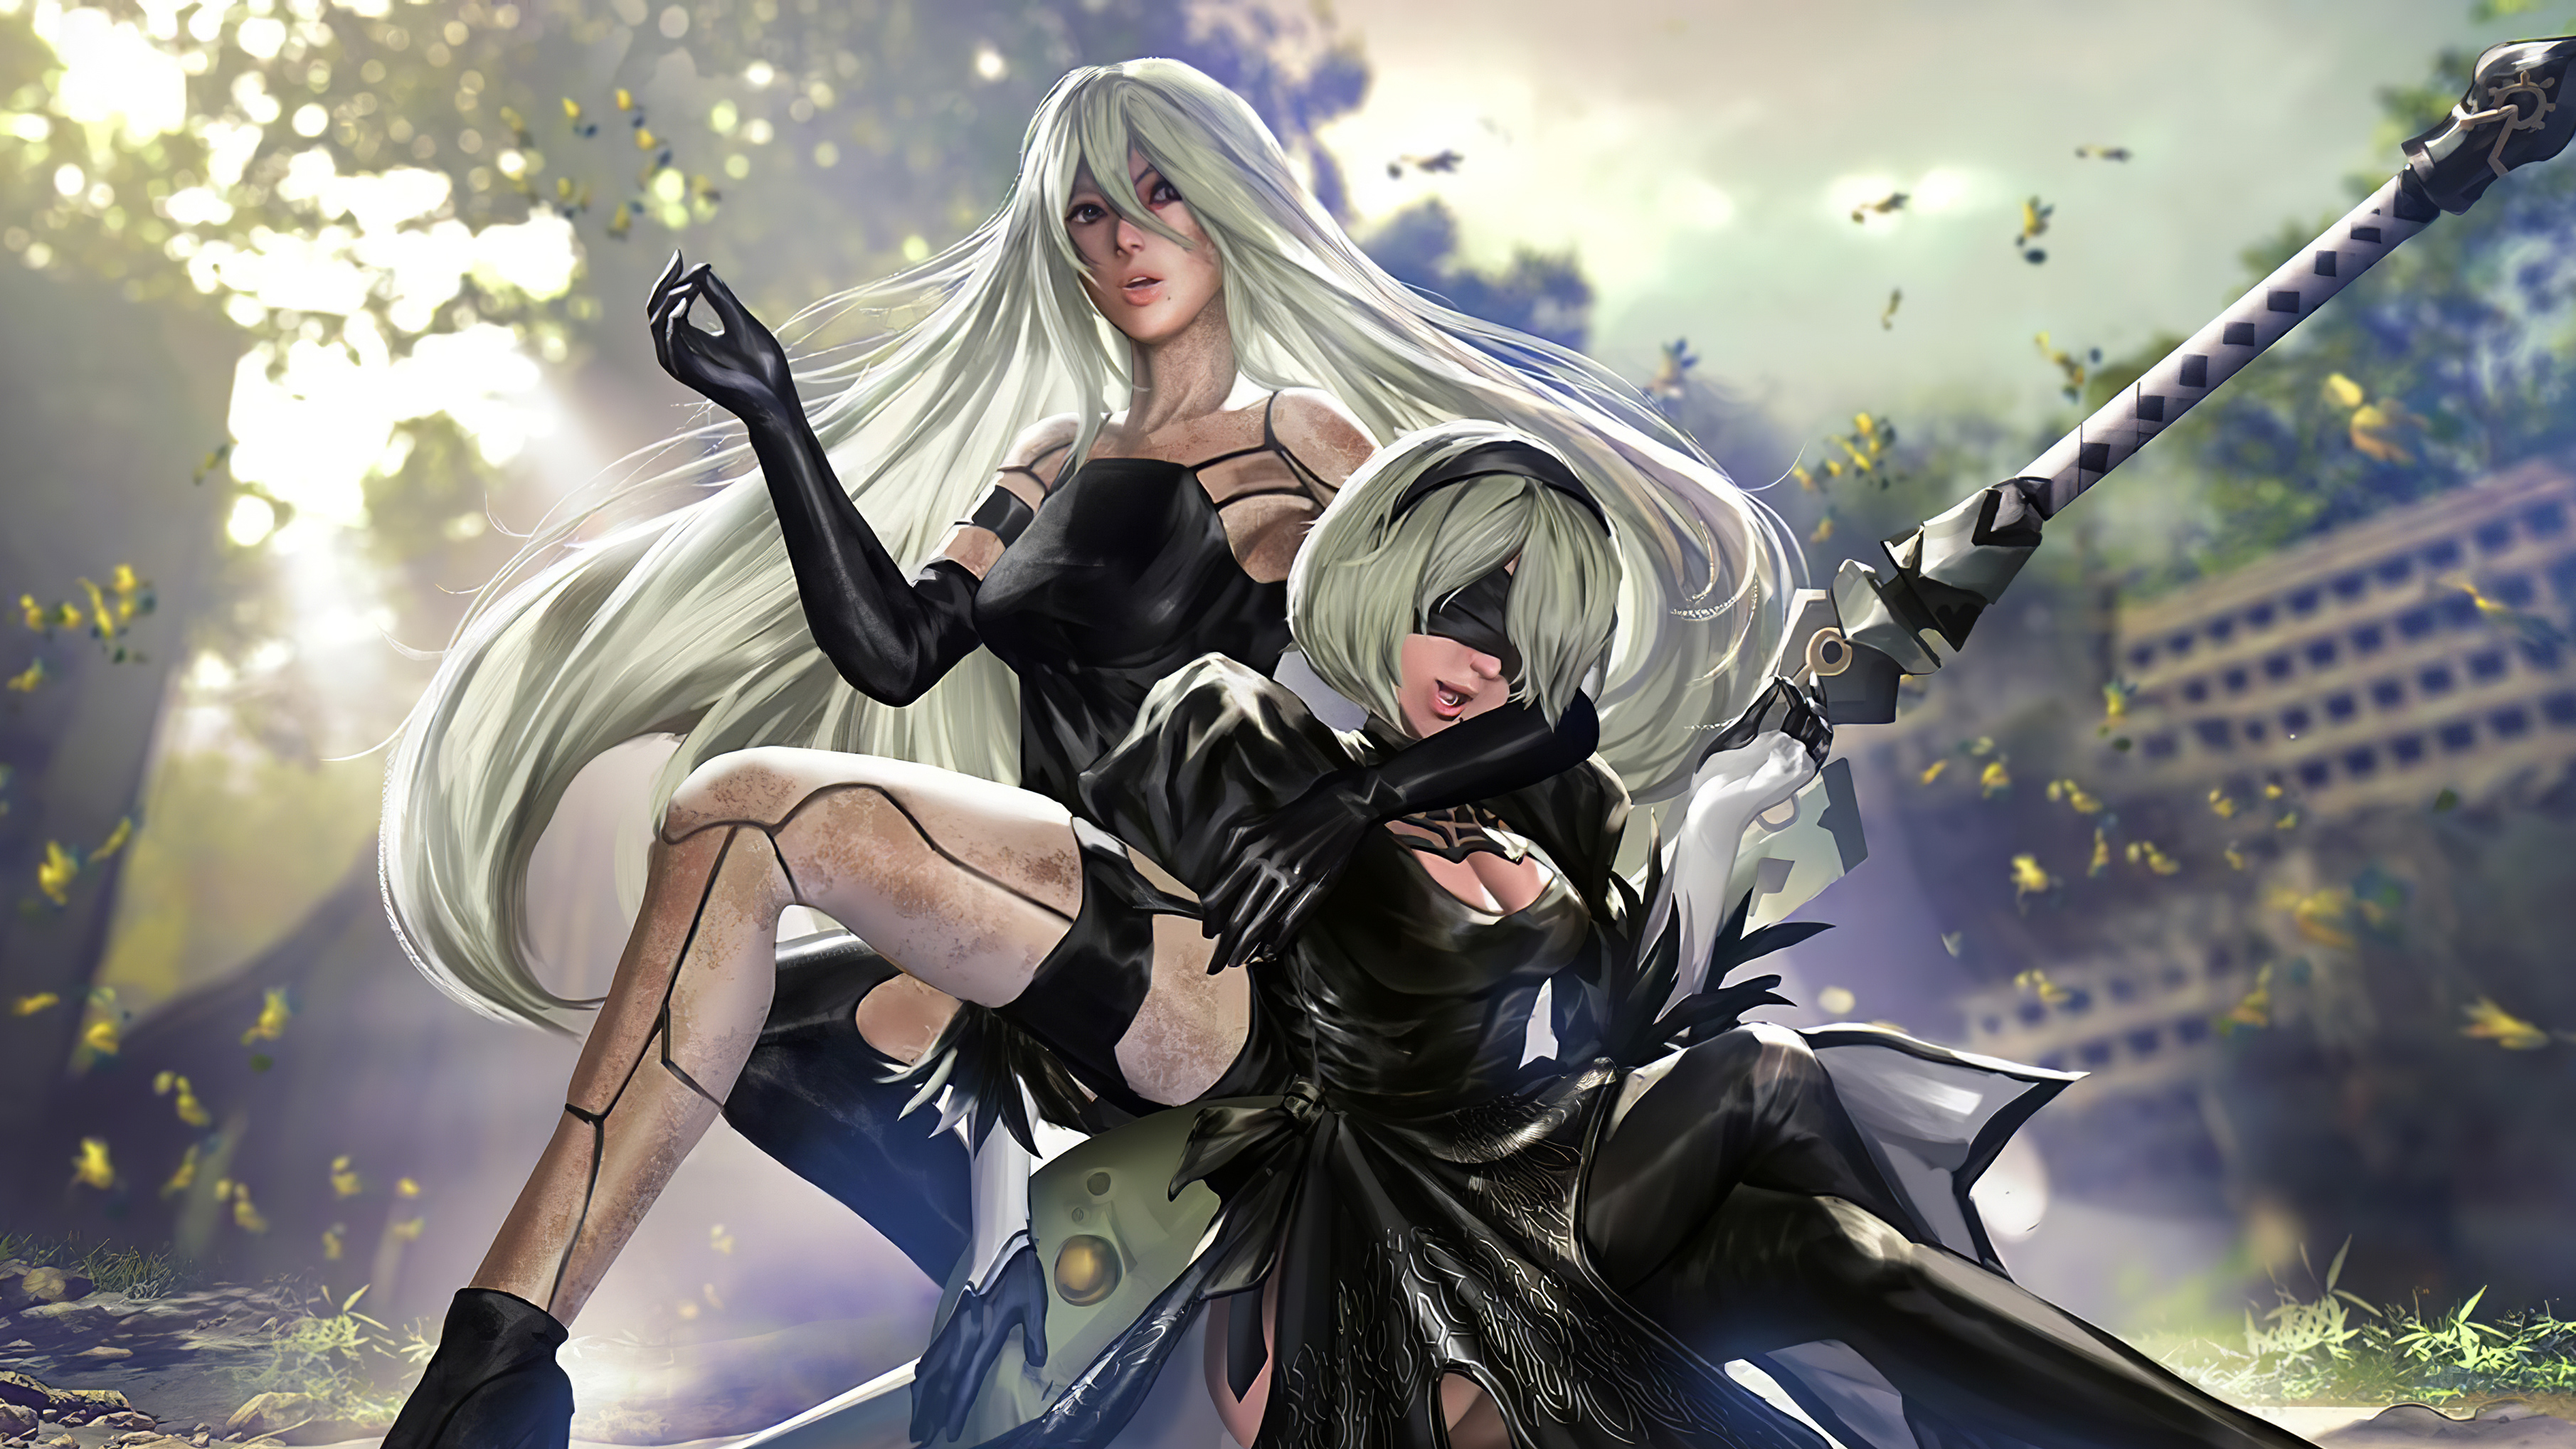 2b Nier Automata 4k Hd Games 4k Wallpapers Images Backgrounds Photos And Pictures